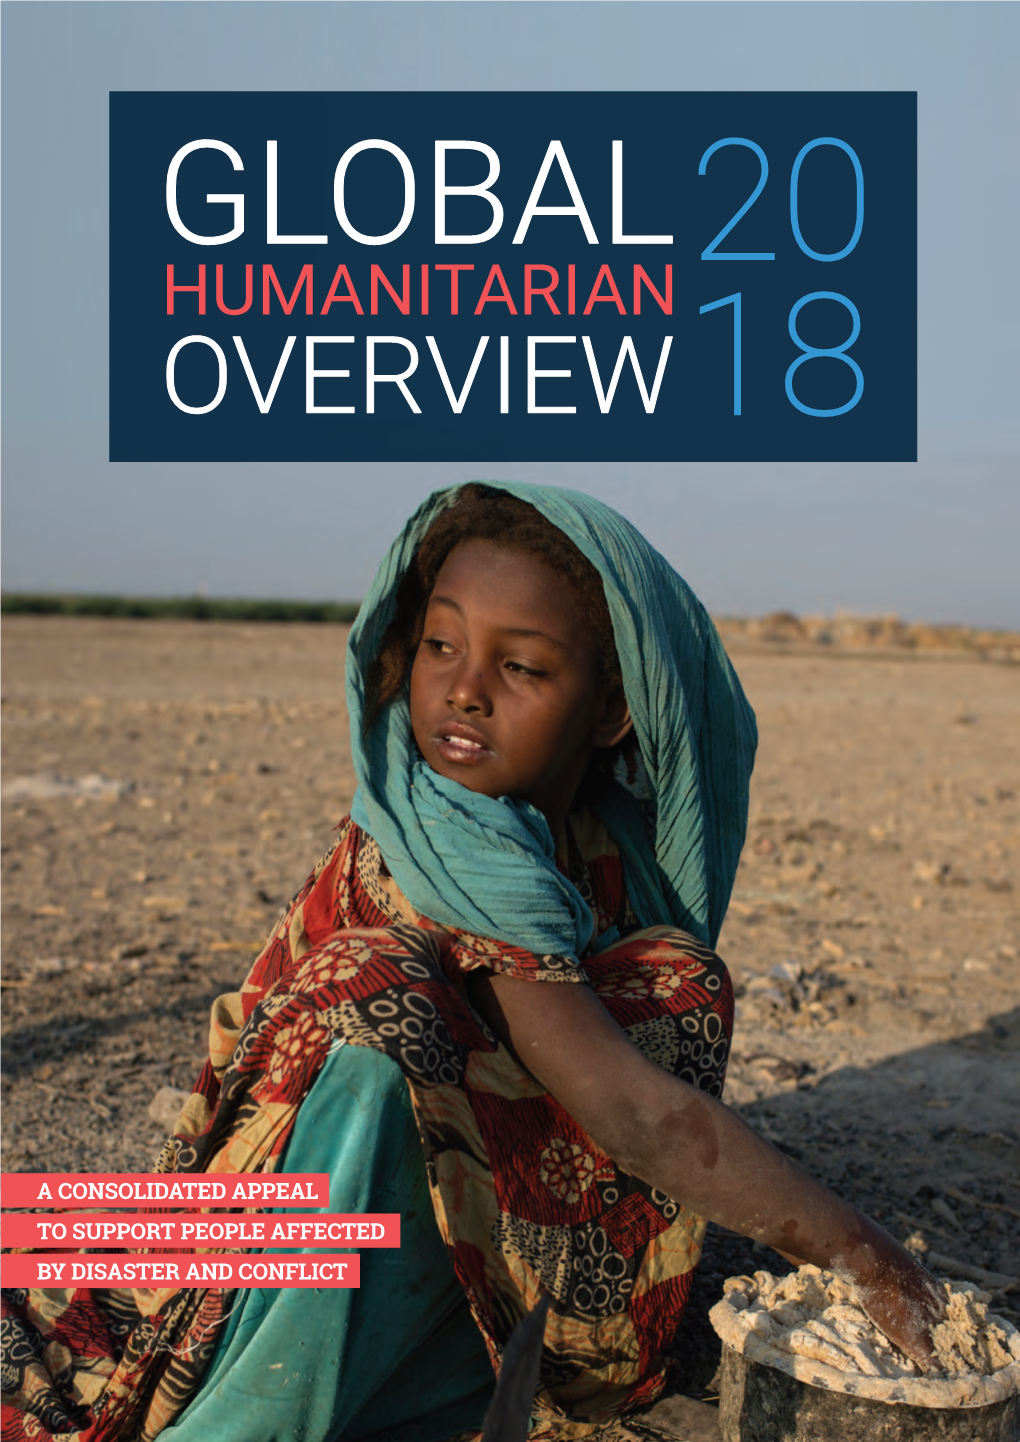 OCHA) in Collaboration with Humanitarian Partners Across the World